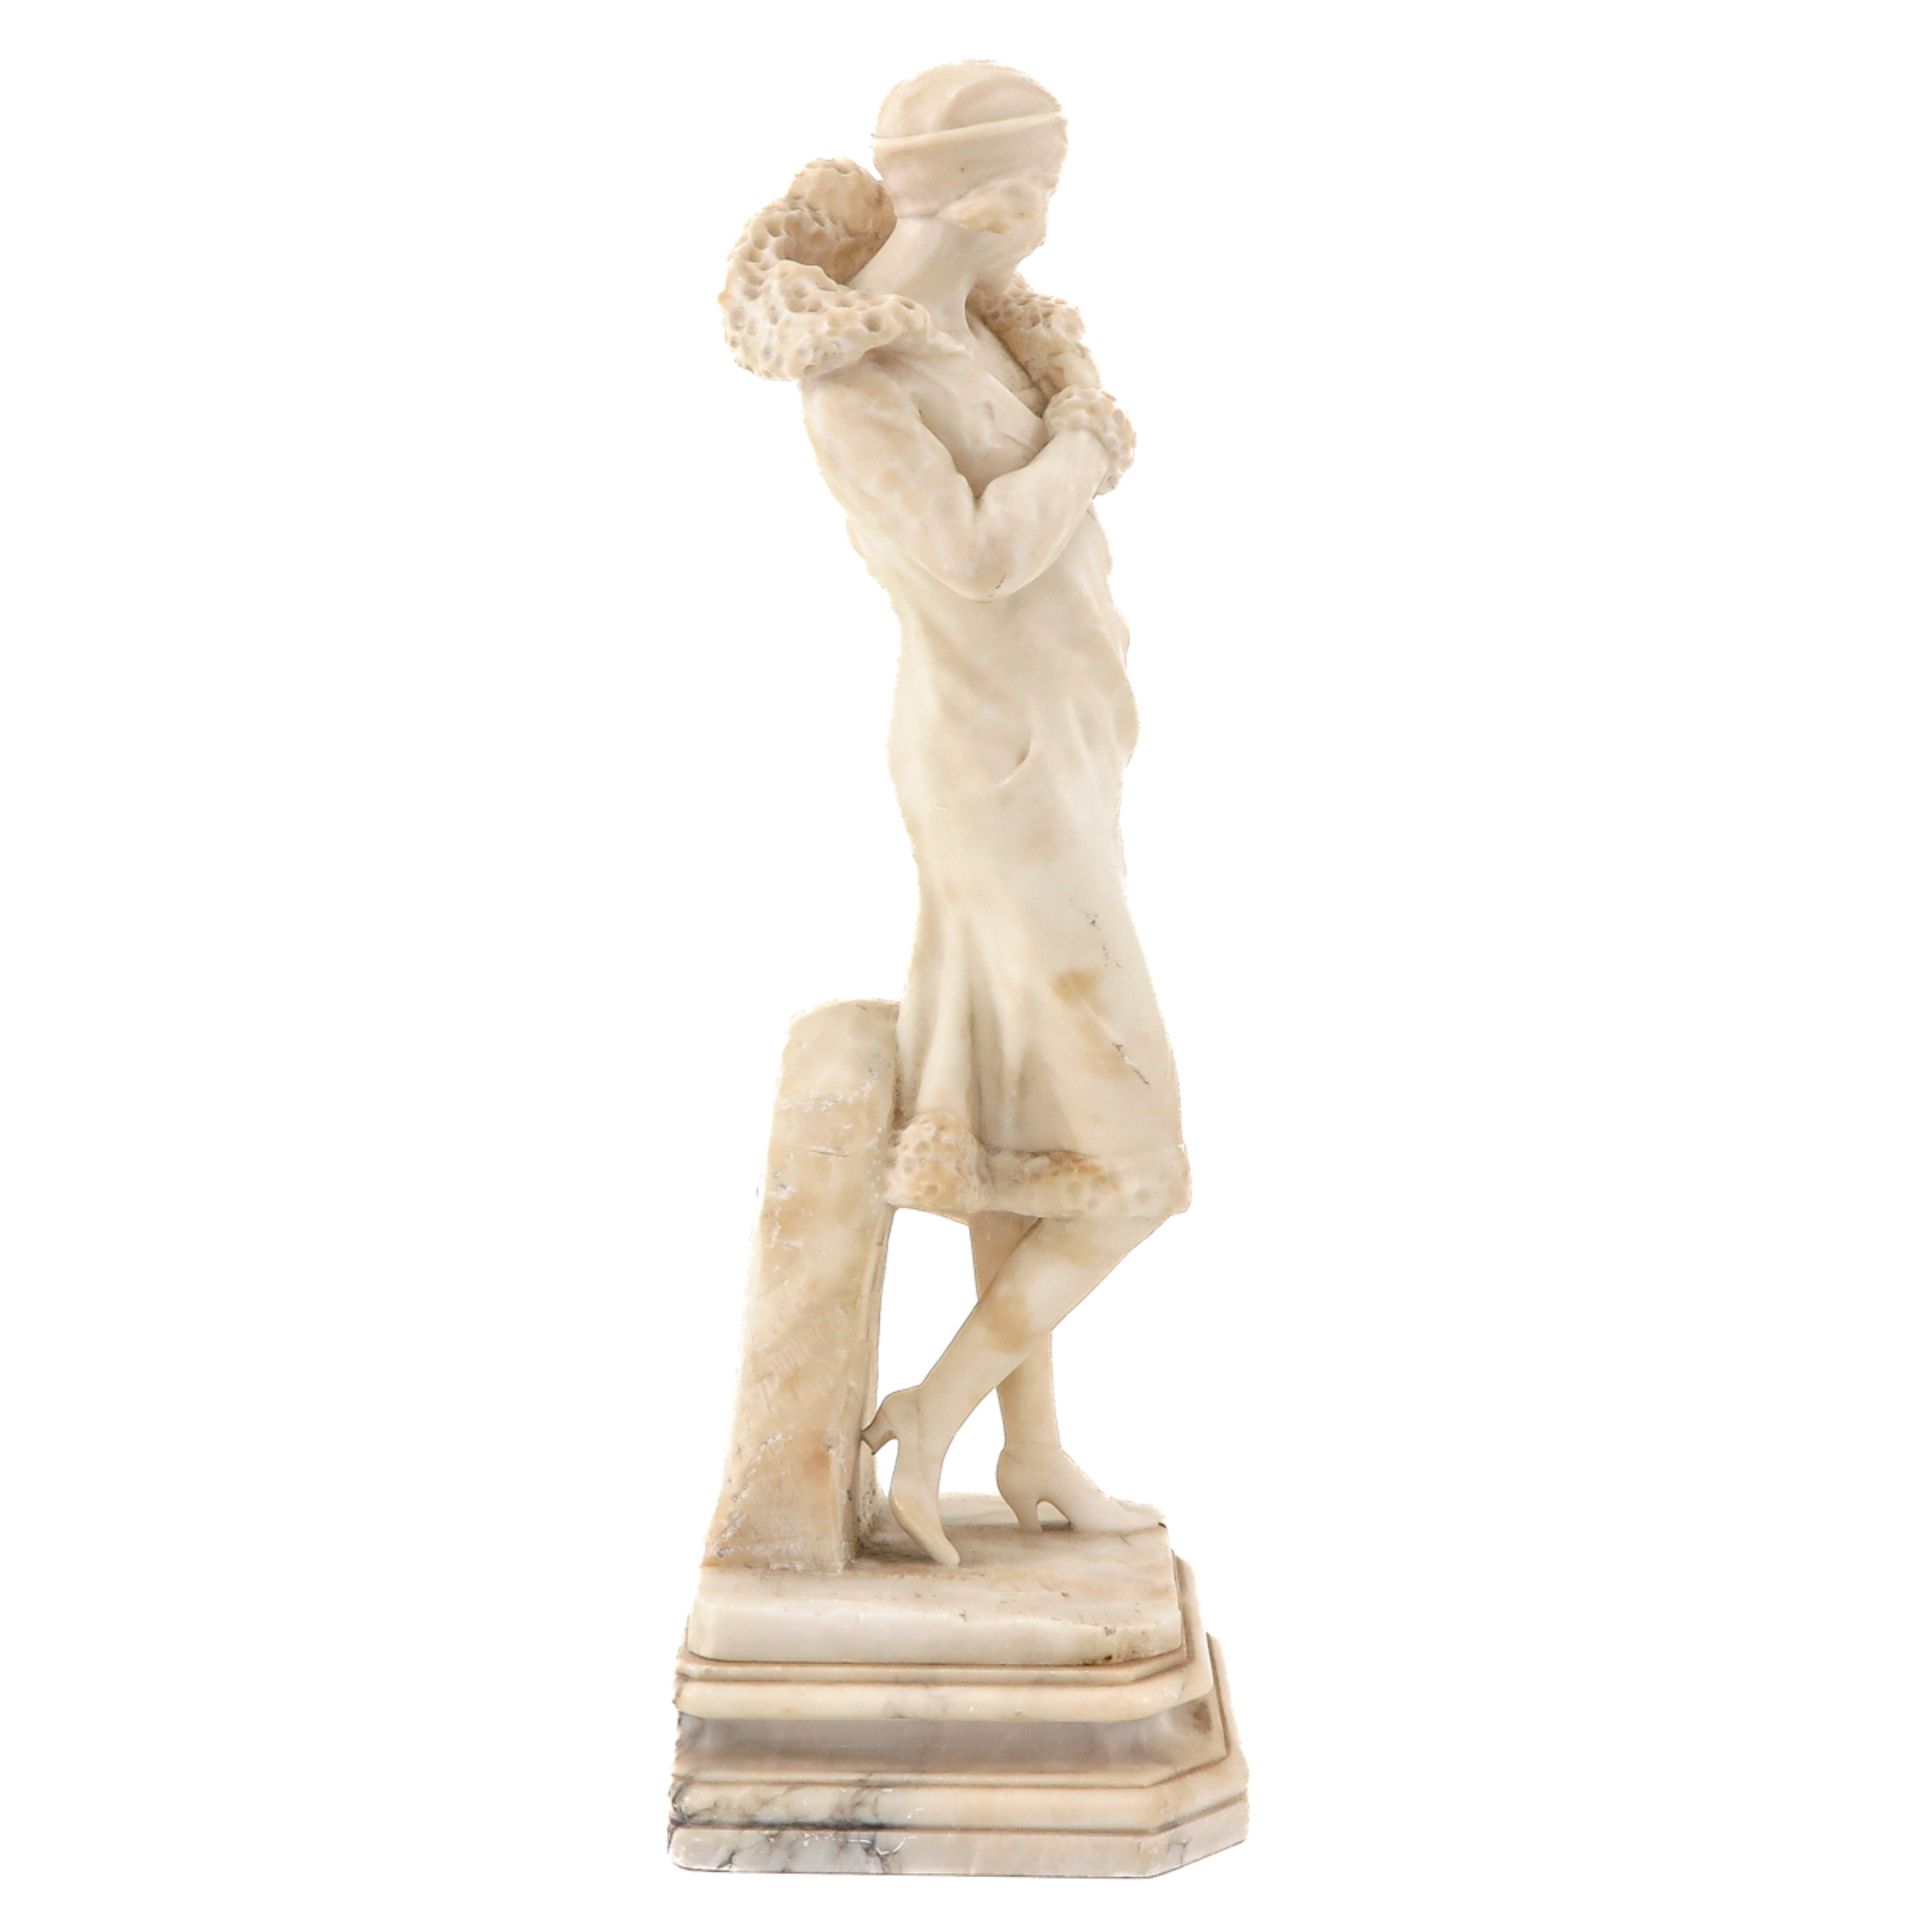 A Marble Sculpture - Image 4 of 9